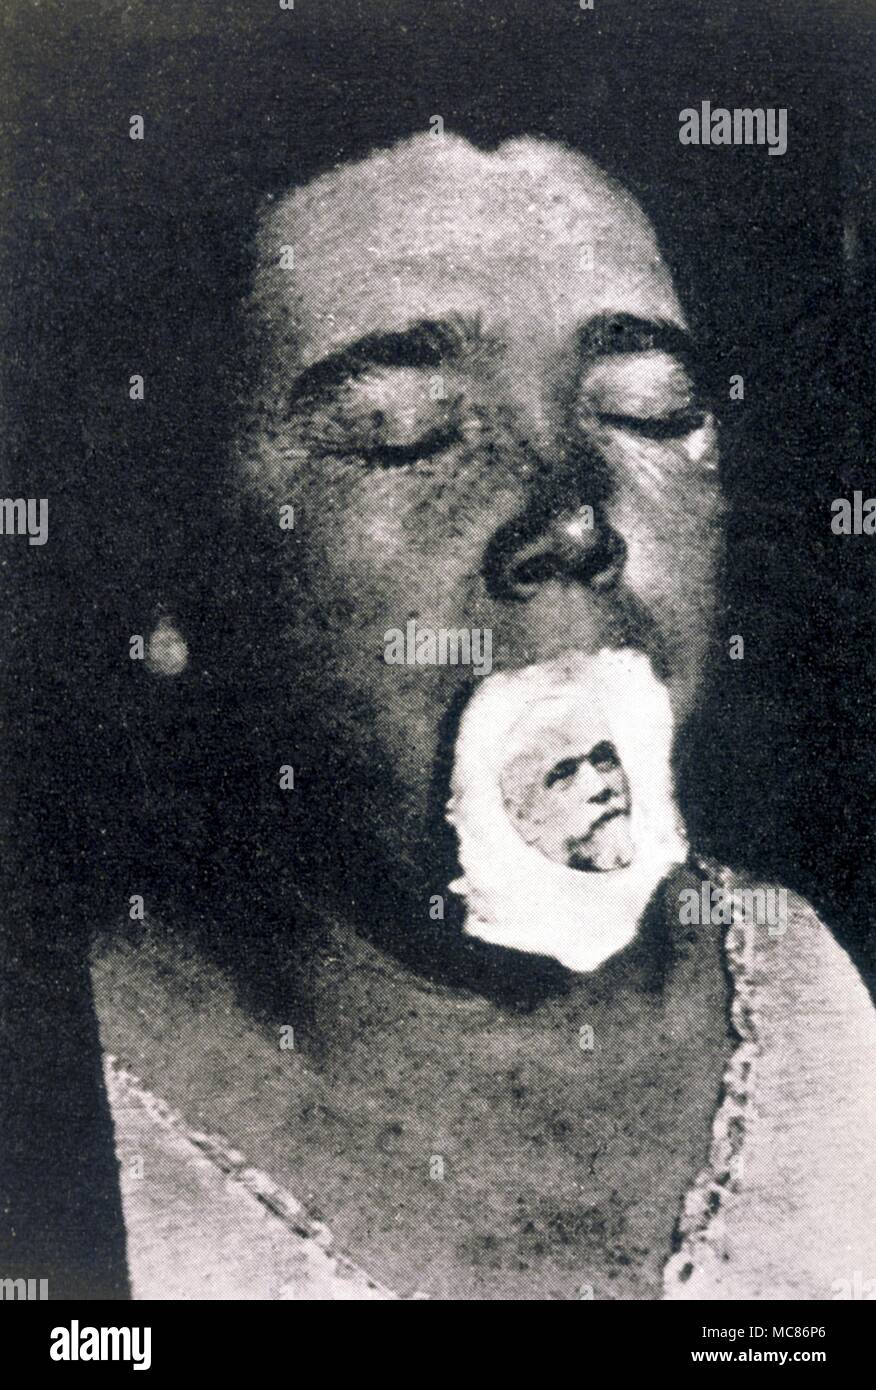 PSYCHIC PHENOMENA - TELEPLASM Teleplasm, or ectoplasm, surrounding a portrait of a 'spirit' face identified as being that of the medium's father. Photographed in September, 1928, in Winnipeg Stock Photo